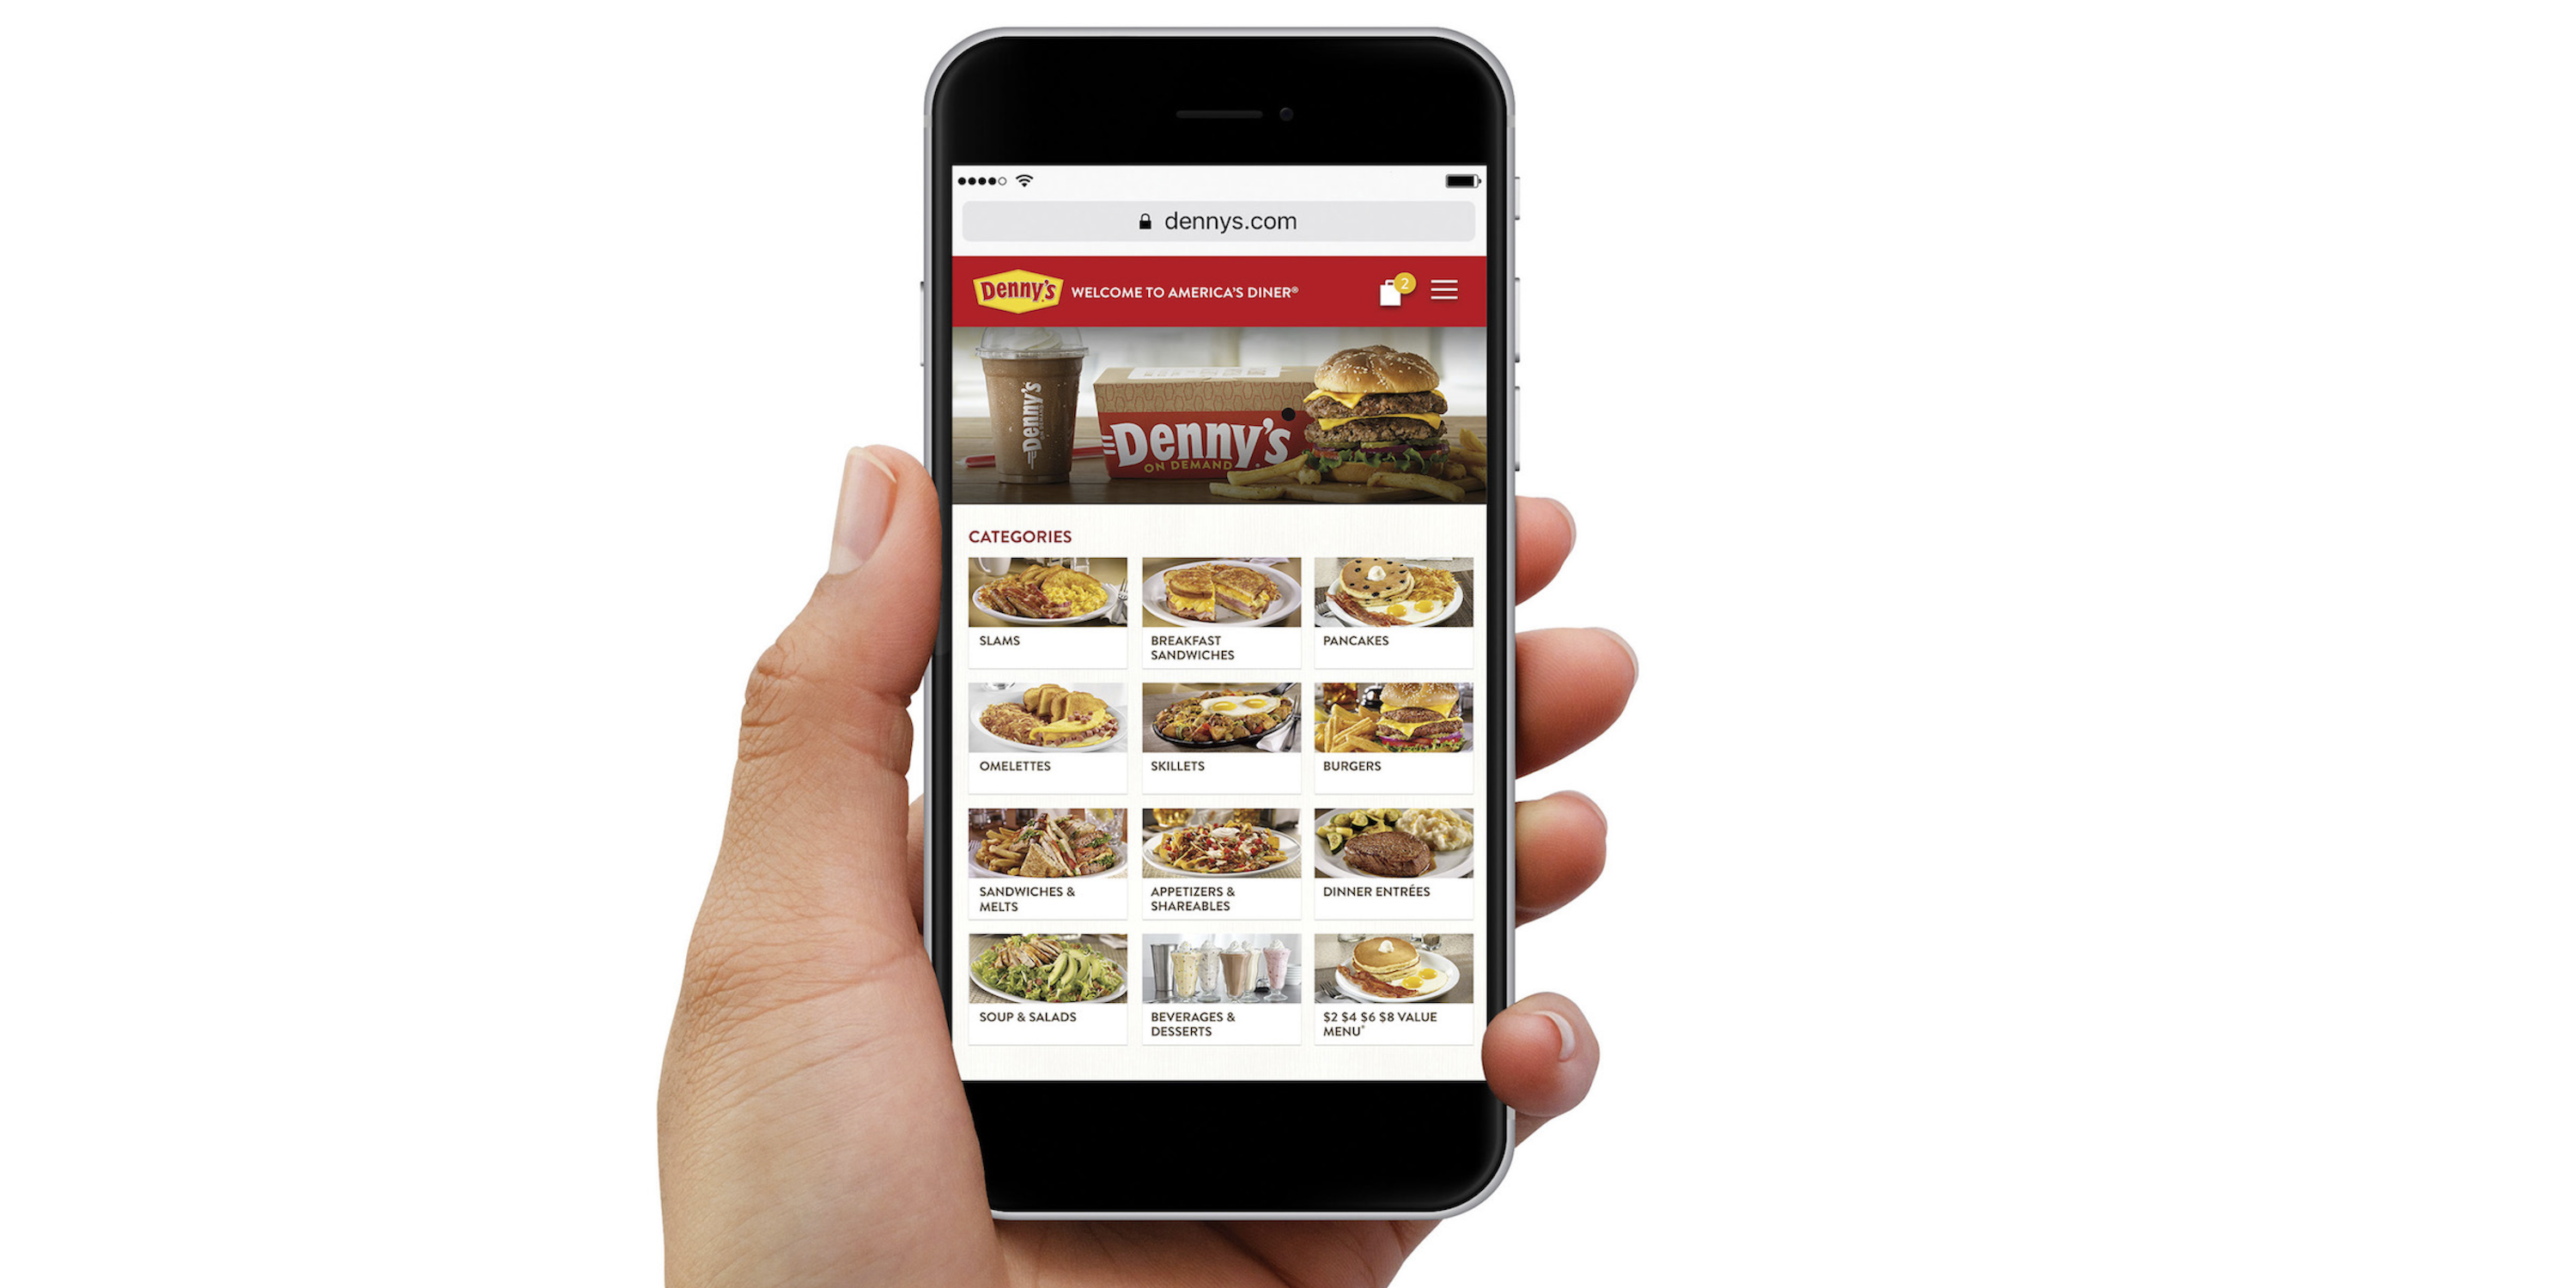 Dennys Launches Online Ordering And Delivery Via Mobile App And Twitter Dms 9to5mac